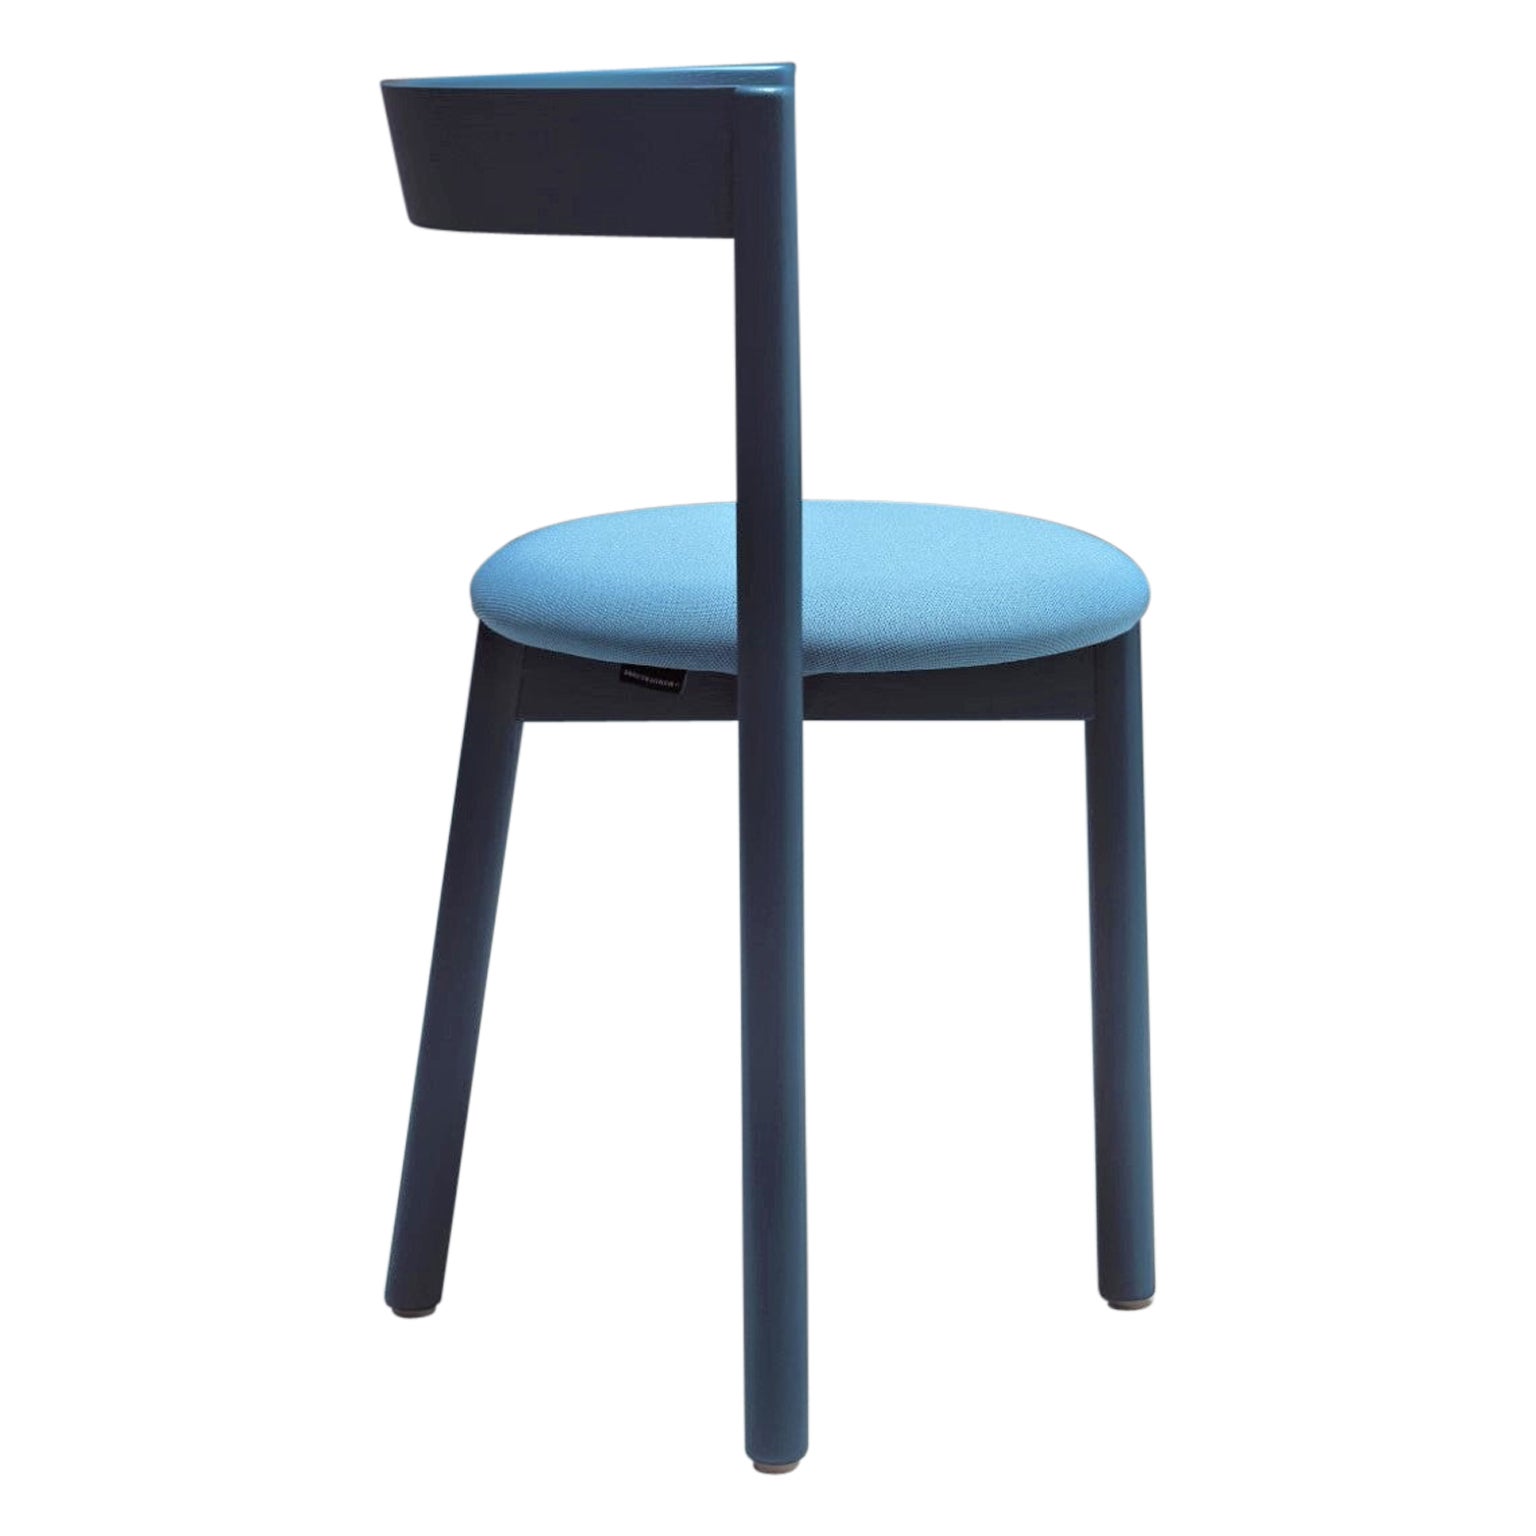 April Chair by Neri&Hu For Sale